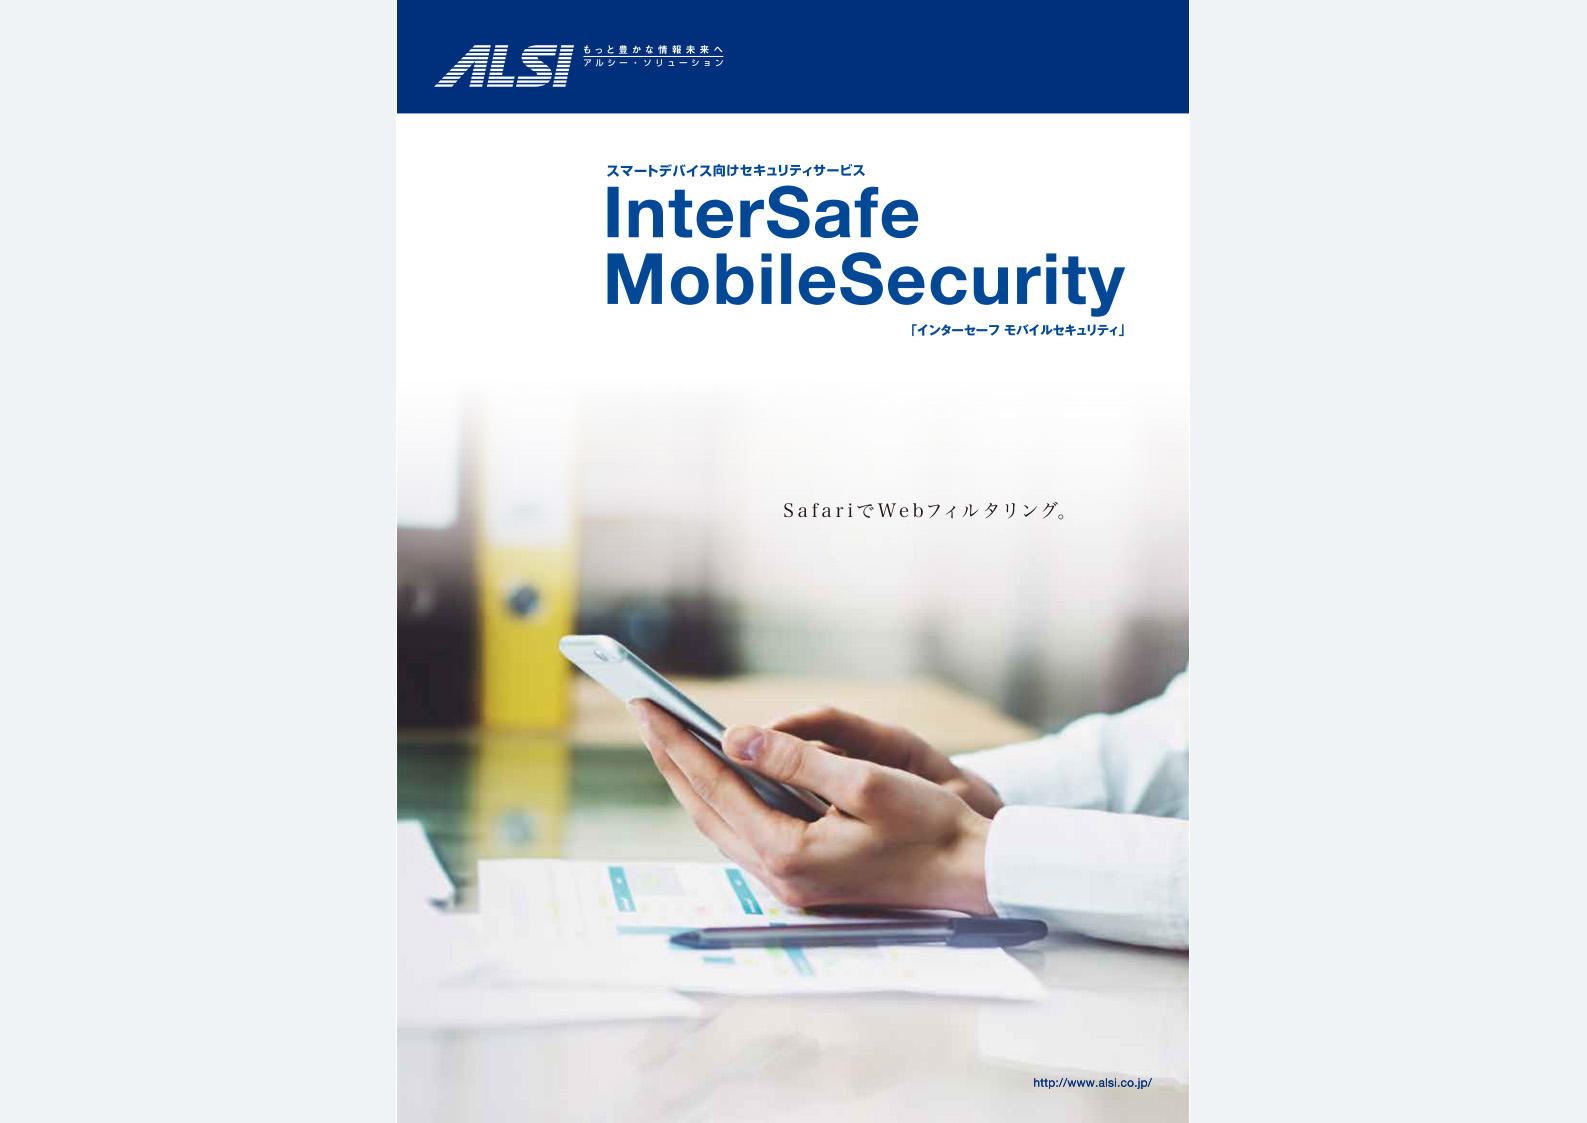 InterSafe MobileSecurity / Lite
カタログ（A4サイズ印刷用）